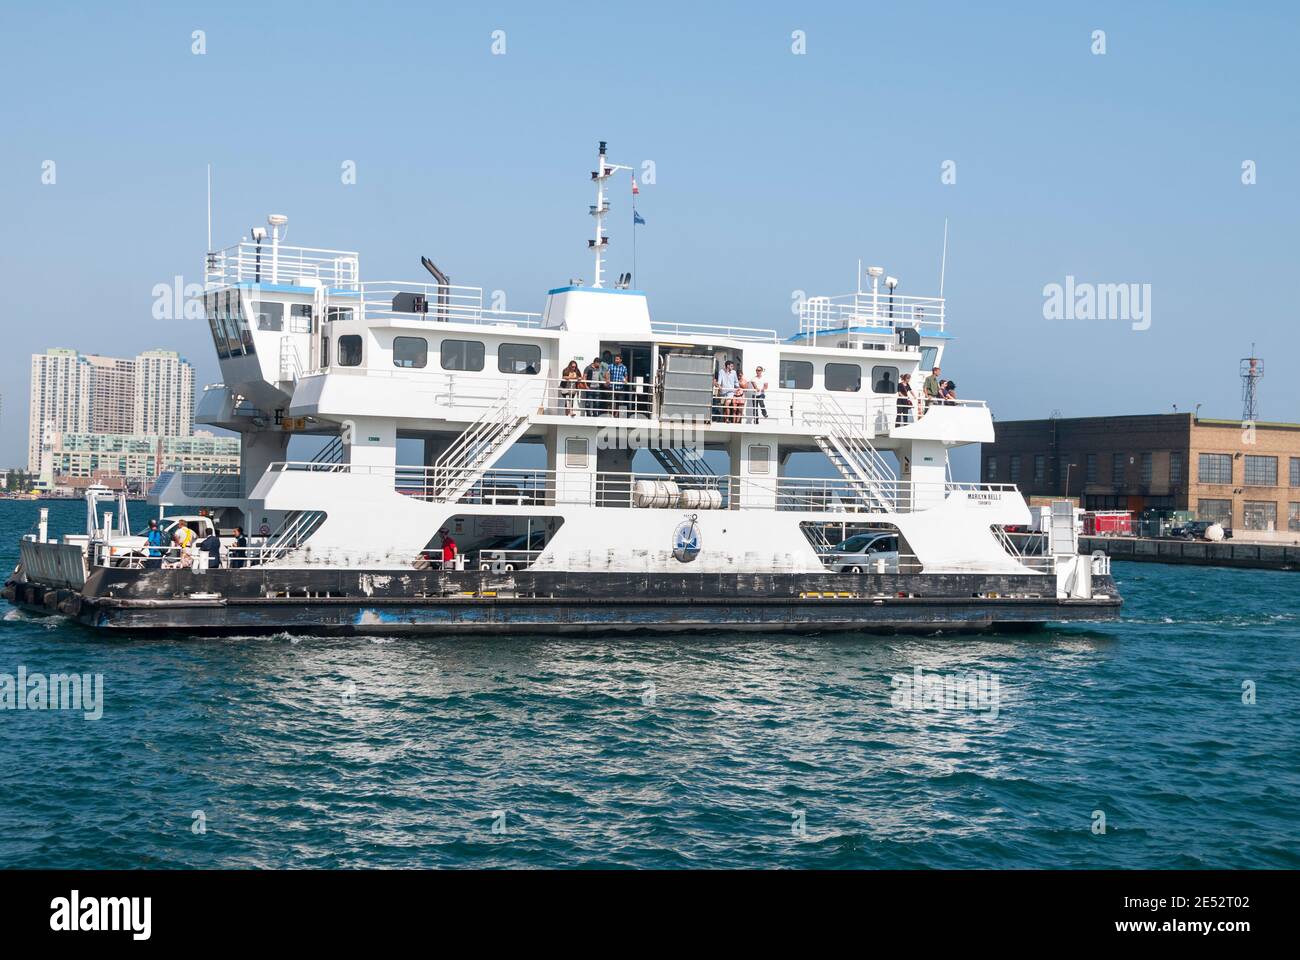 The worlds shortest ferry ride at 120m (400 feet)  loaded with cars and passengers for the quick trip to the Toronto's Island airport. Stock Photo